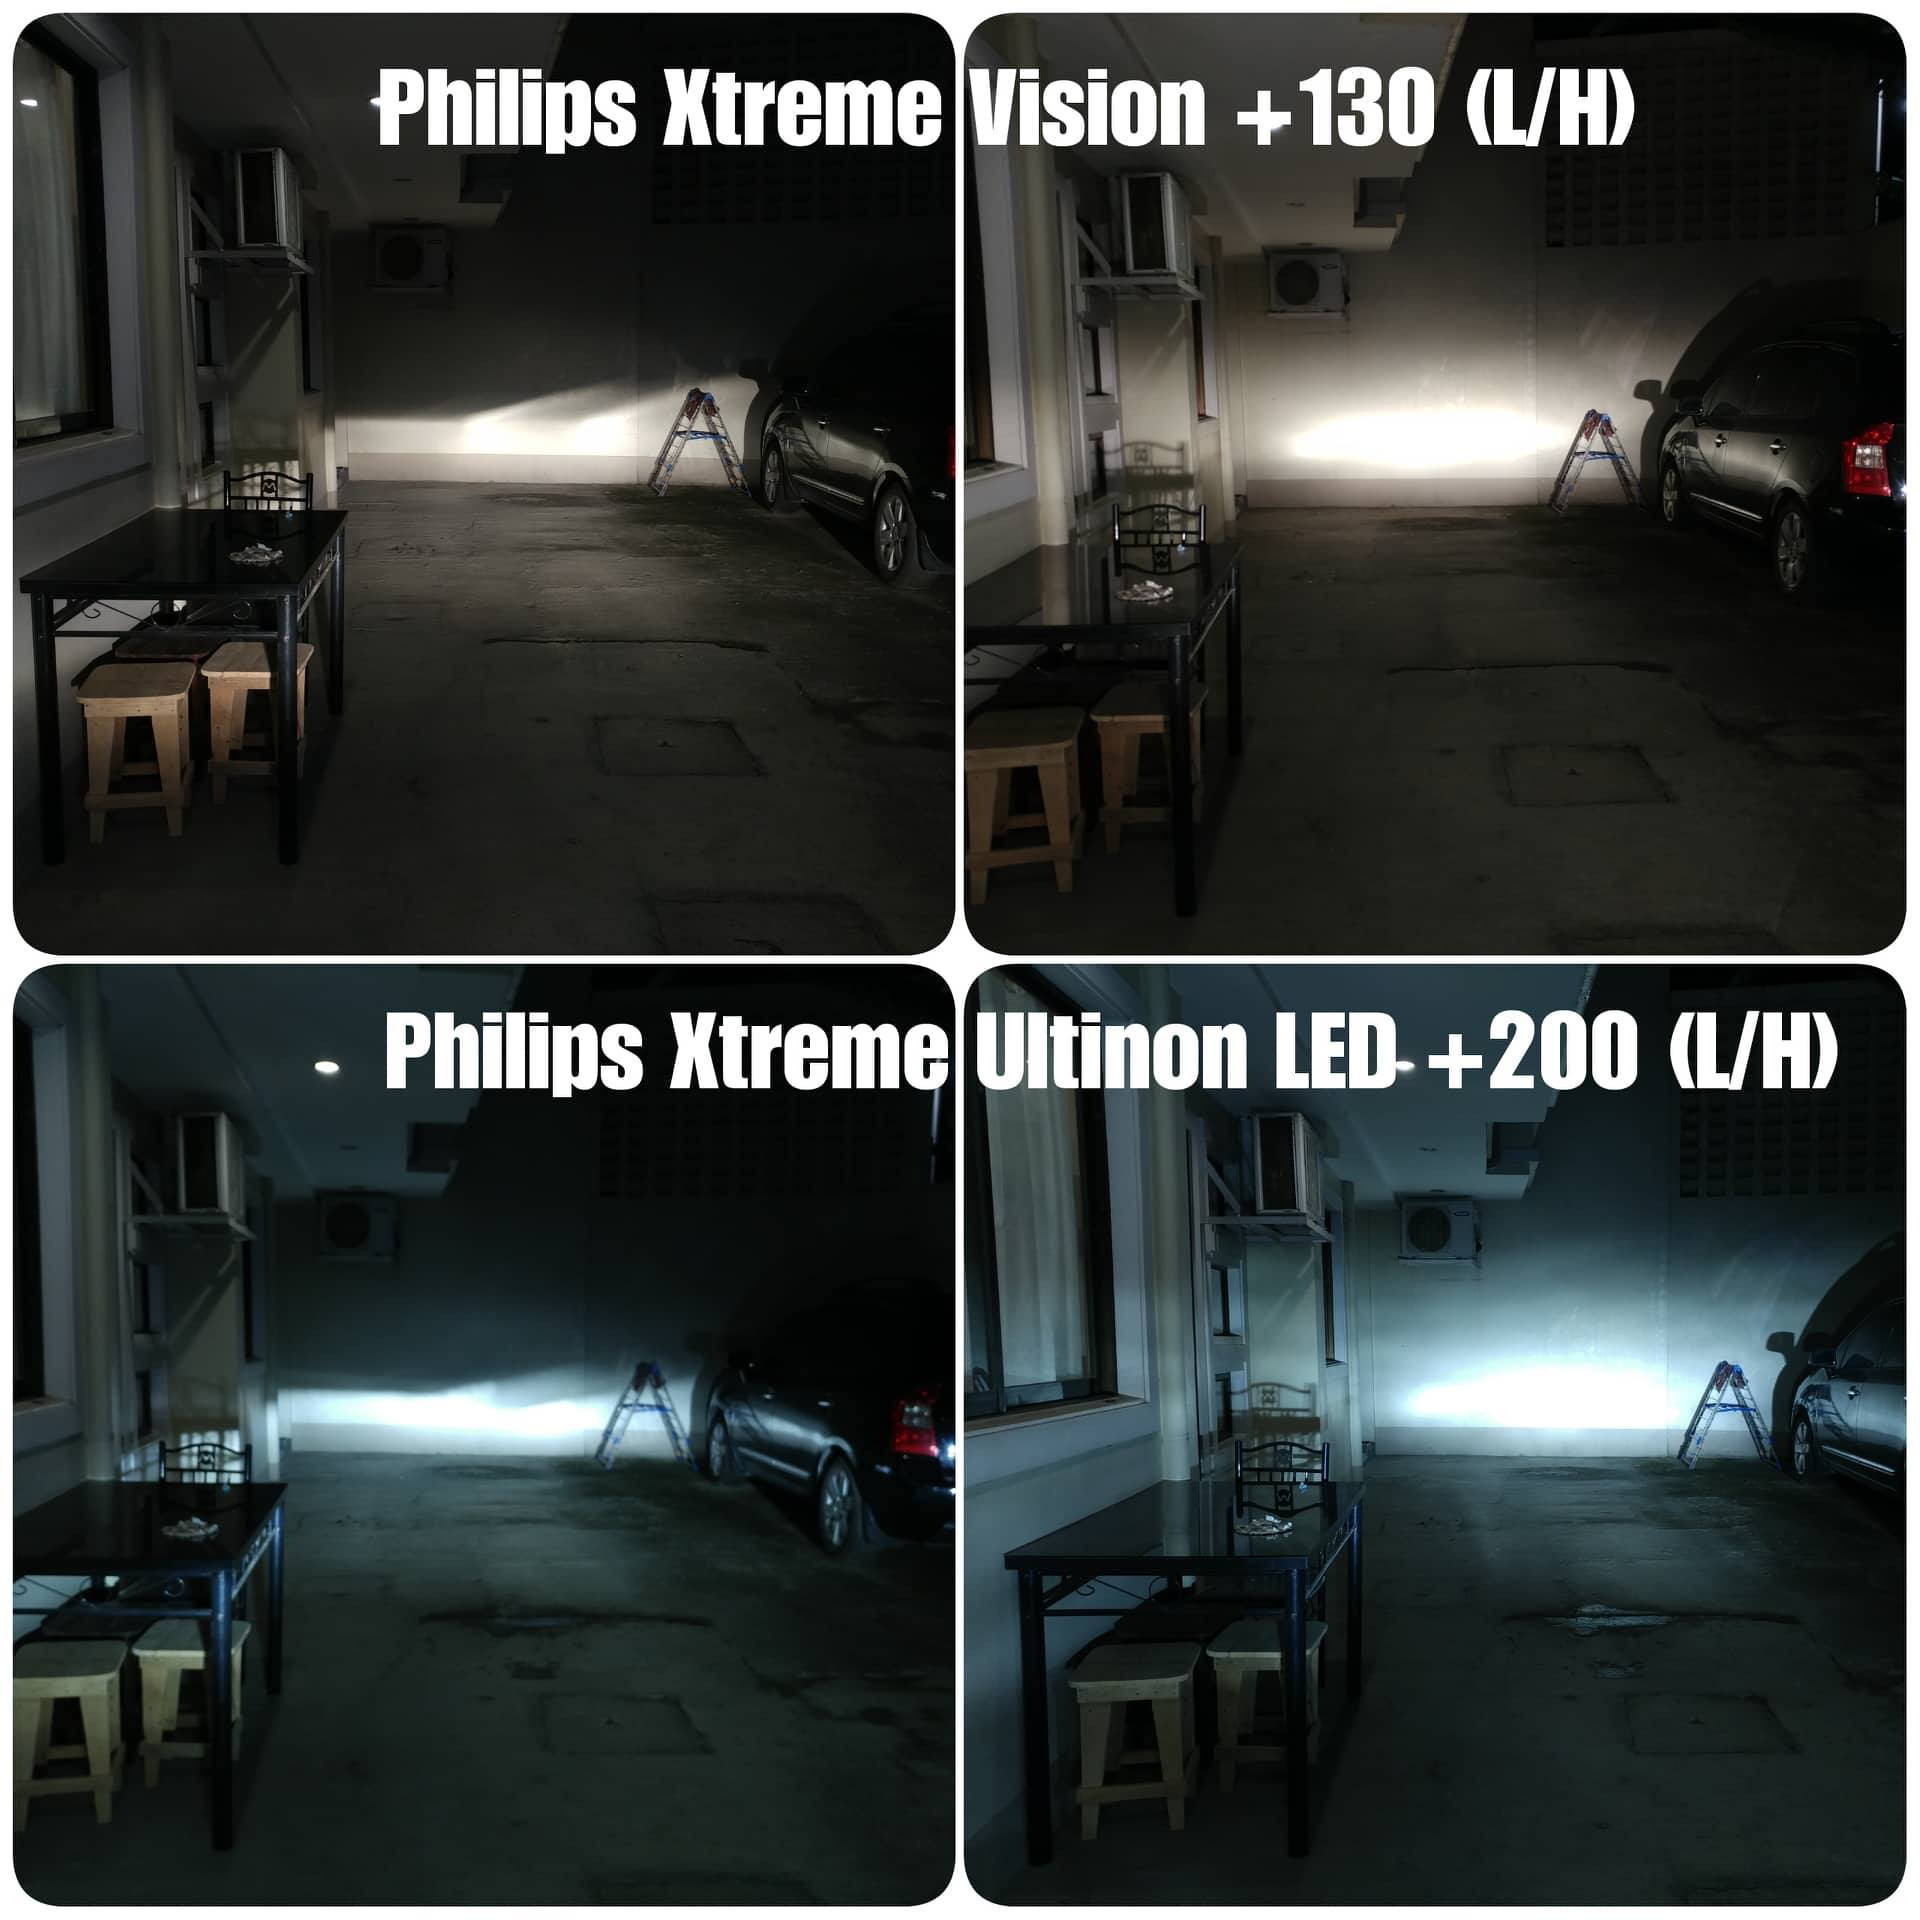 Philips X-treme Vision +130% - Official Video from Philips 